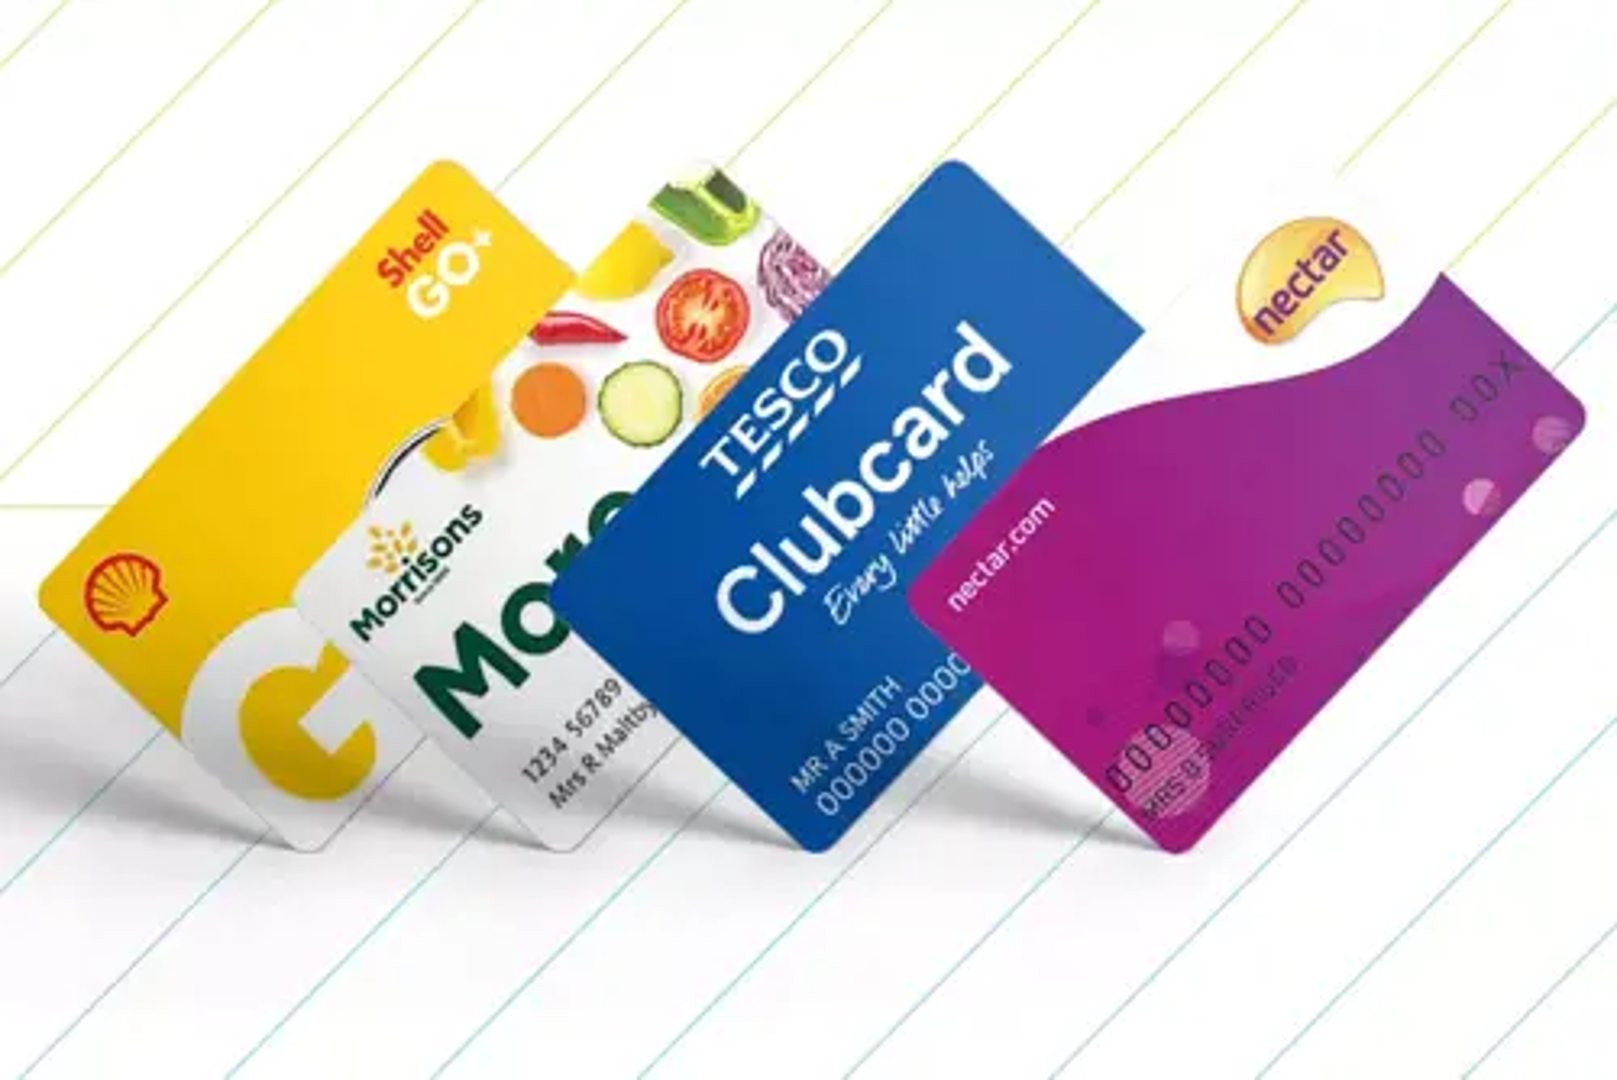 Row of 3 fuel station loyalty points cards: Shell Go, Morrisons More, Tesco Clubcard and Nectar card.